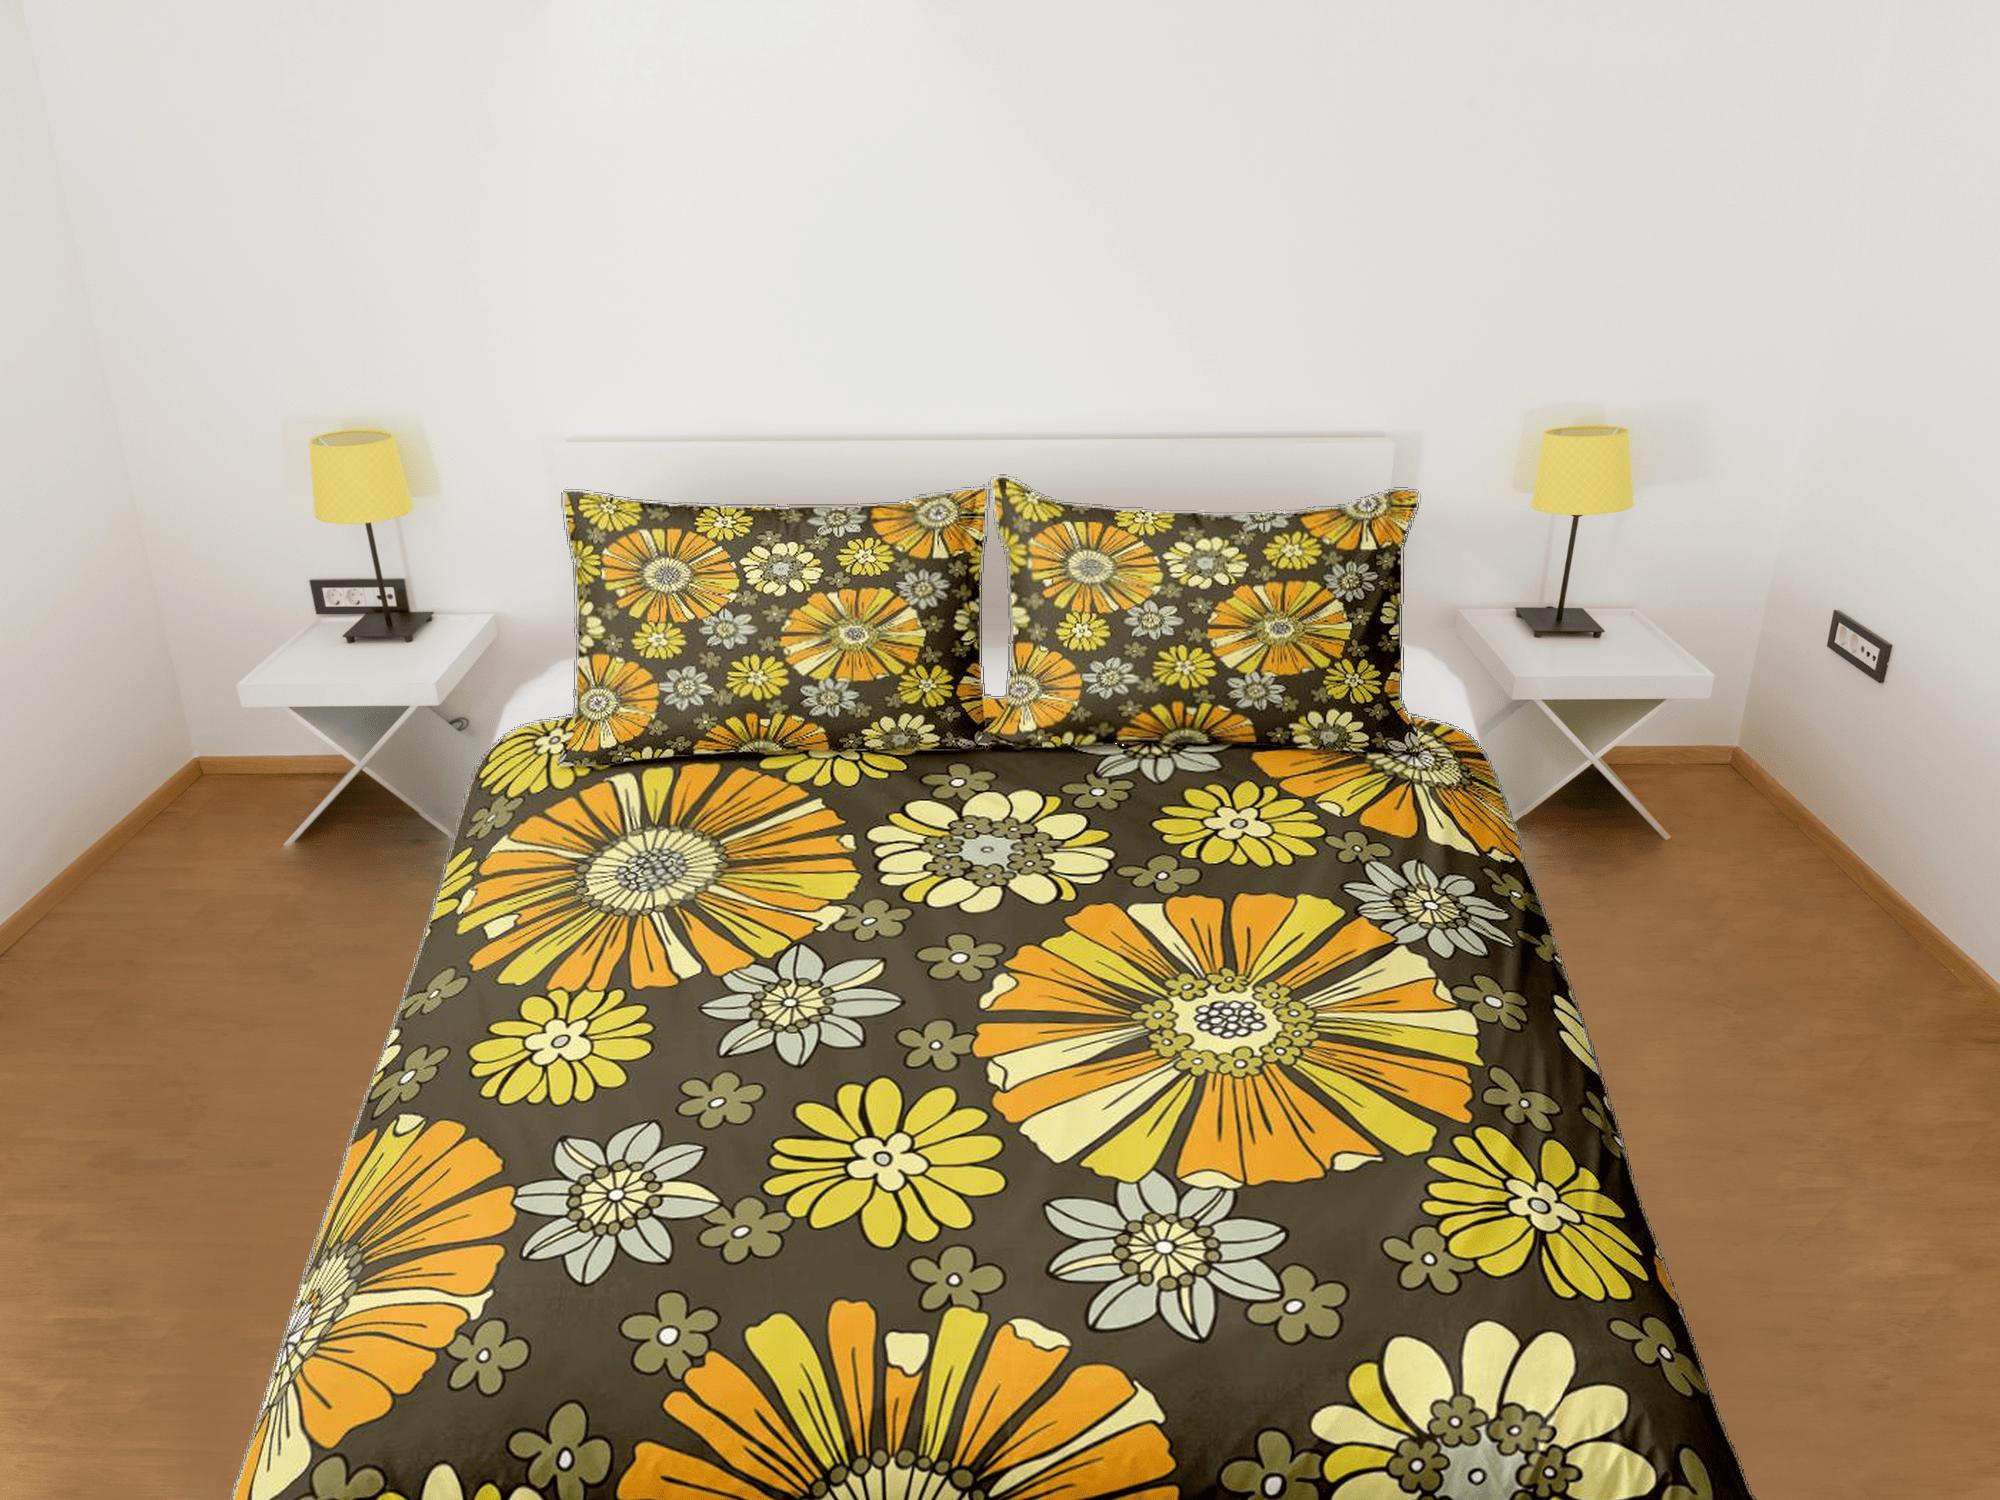 daintyduvet Mid century modern bedding brown floral duvet cover colorful retro bedding, vintage style boho chic bedspread aesthetic bedding daisy